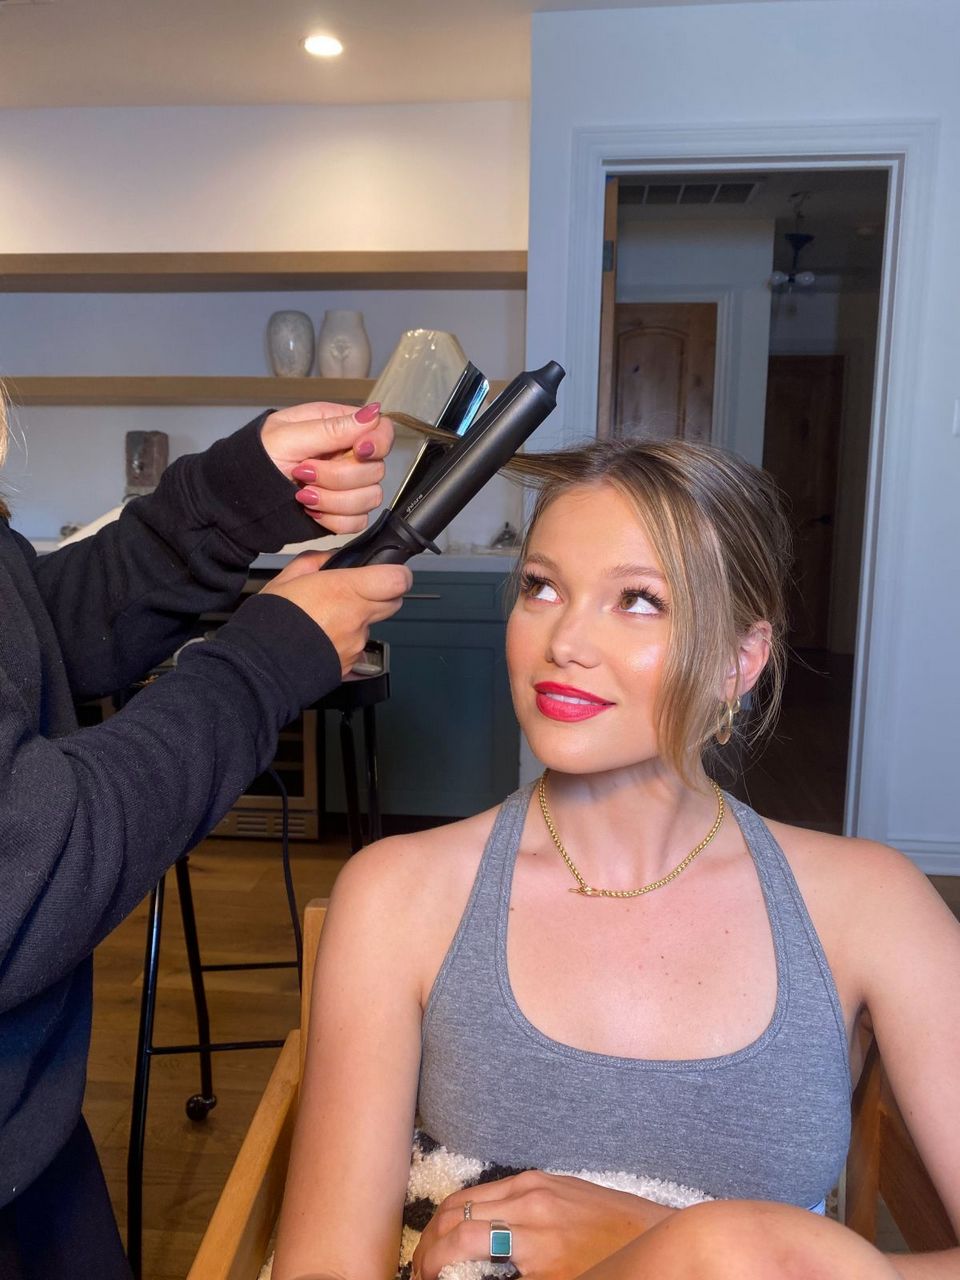 Olivia Holt For W Magazine Getting Ready For Dior S Garden Party March